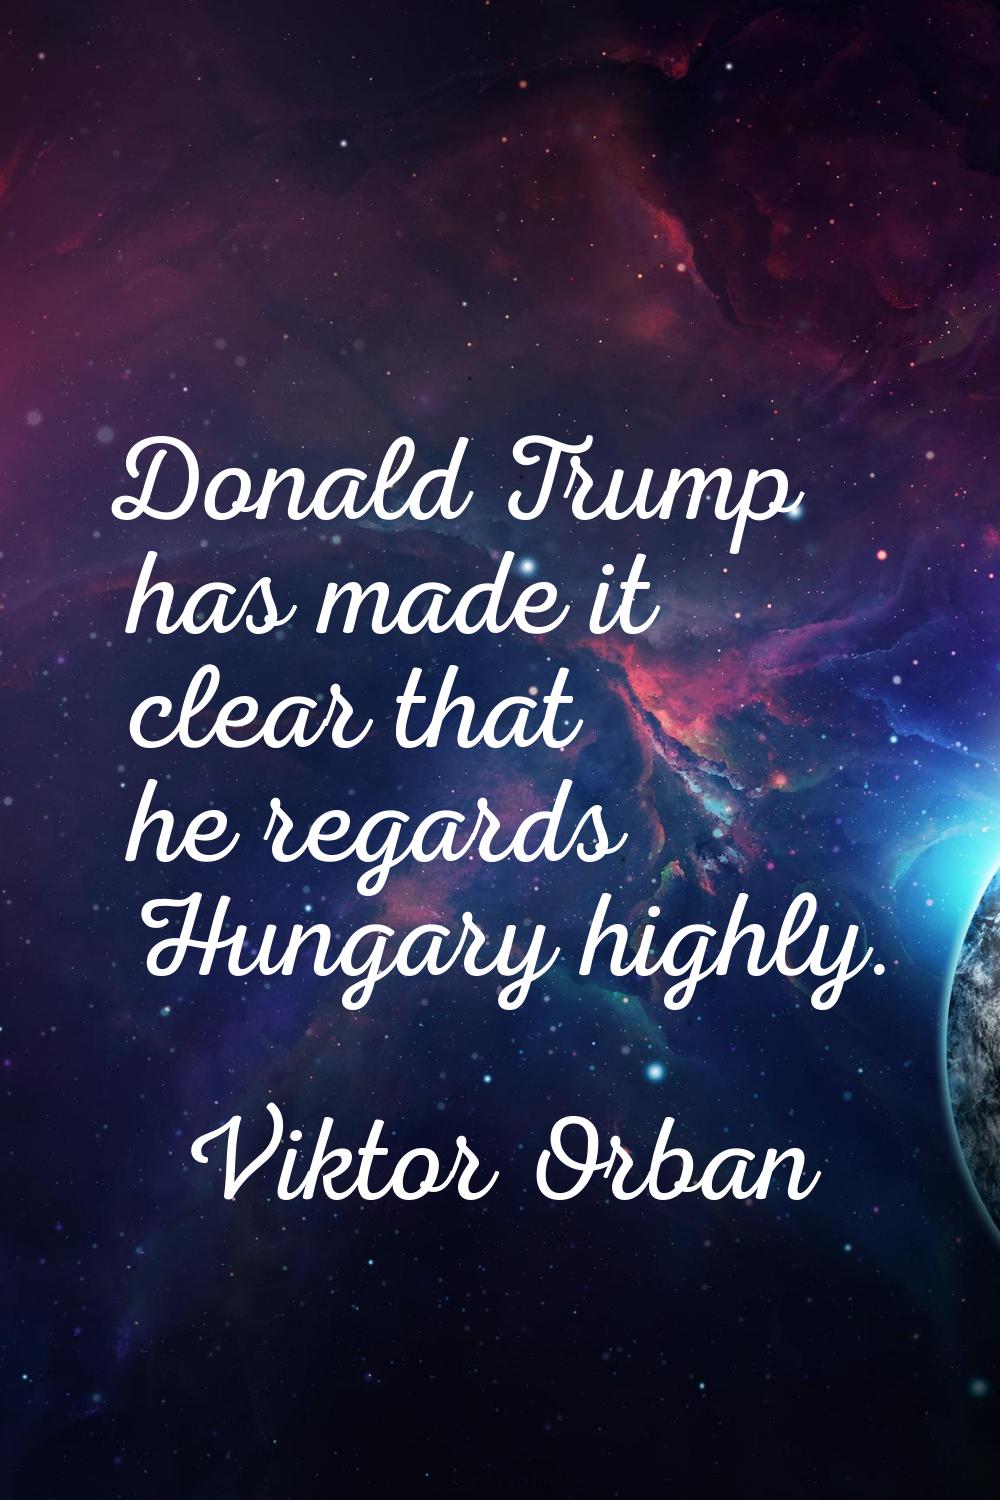 Donald Trump has made it clear that he regards Hungary highly.